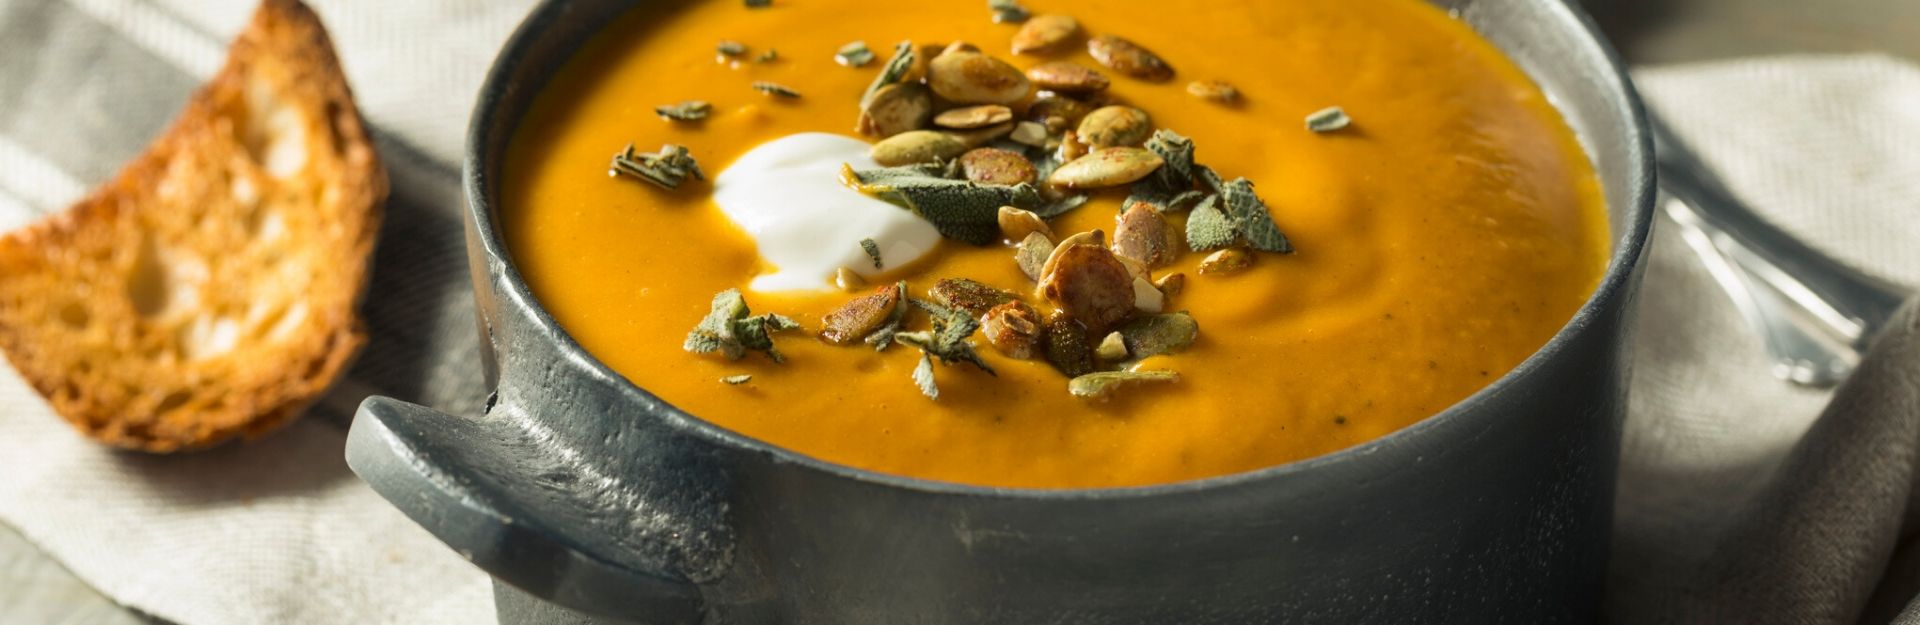 a cozy bowl of butternut squash soup, an example of winter soups